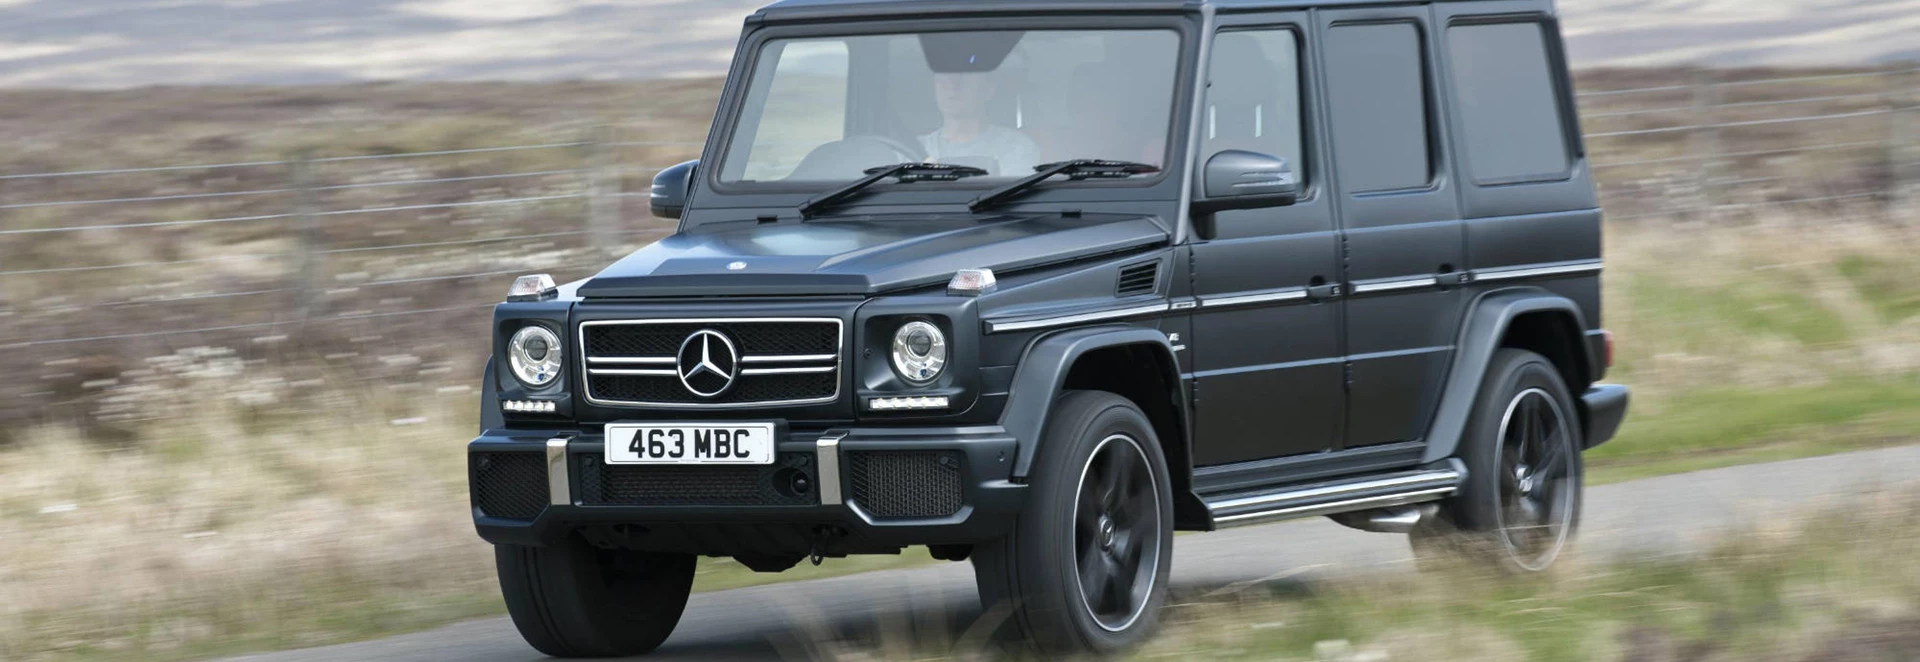 Mercedes G-Class SUV review 